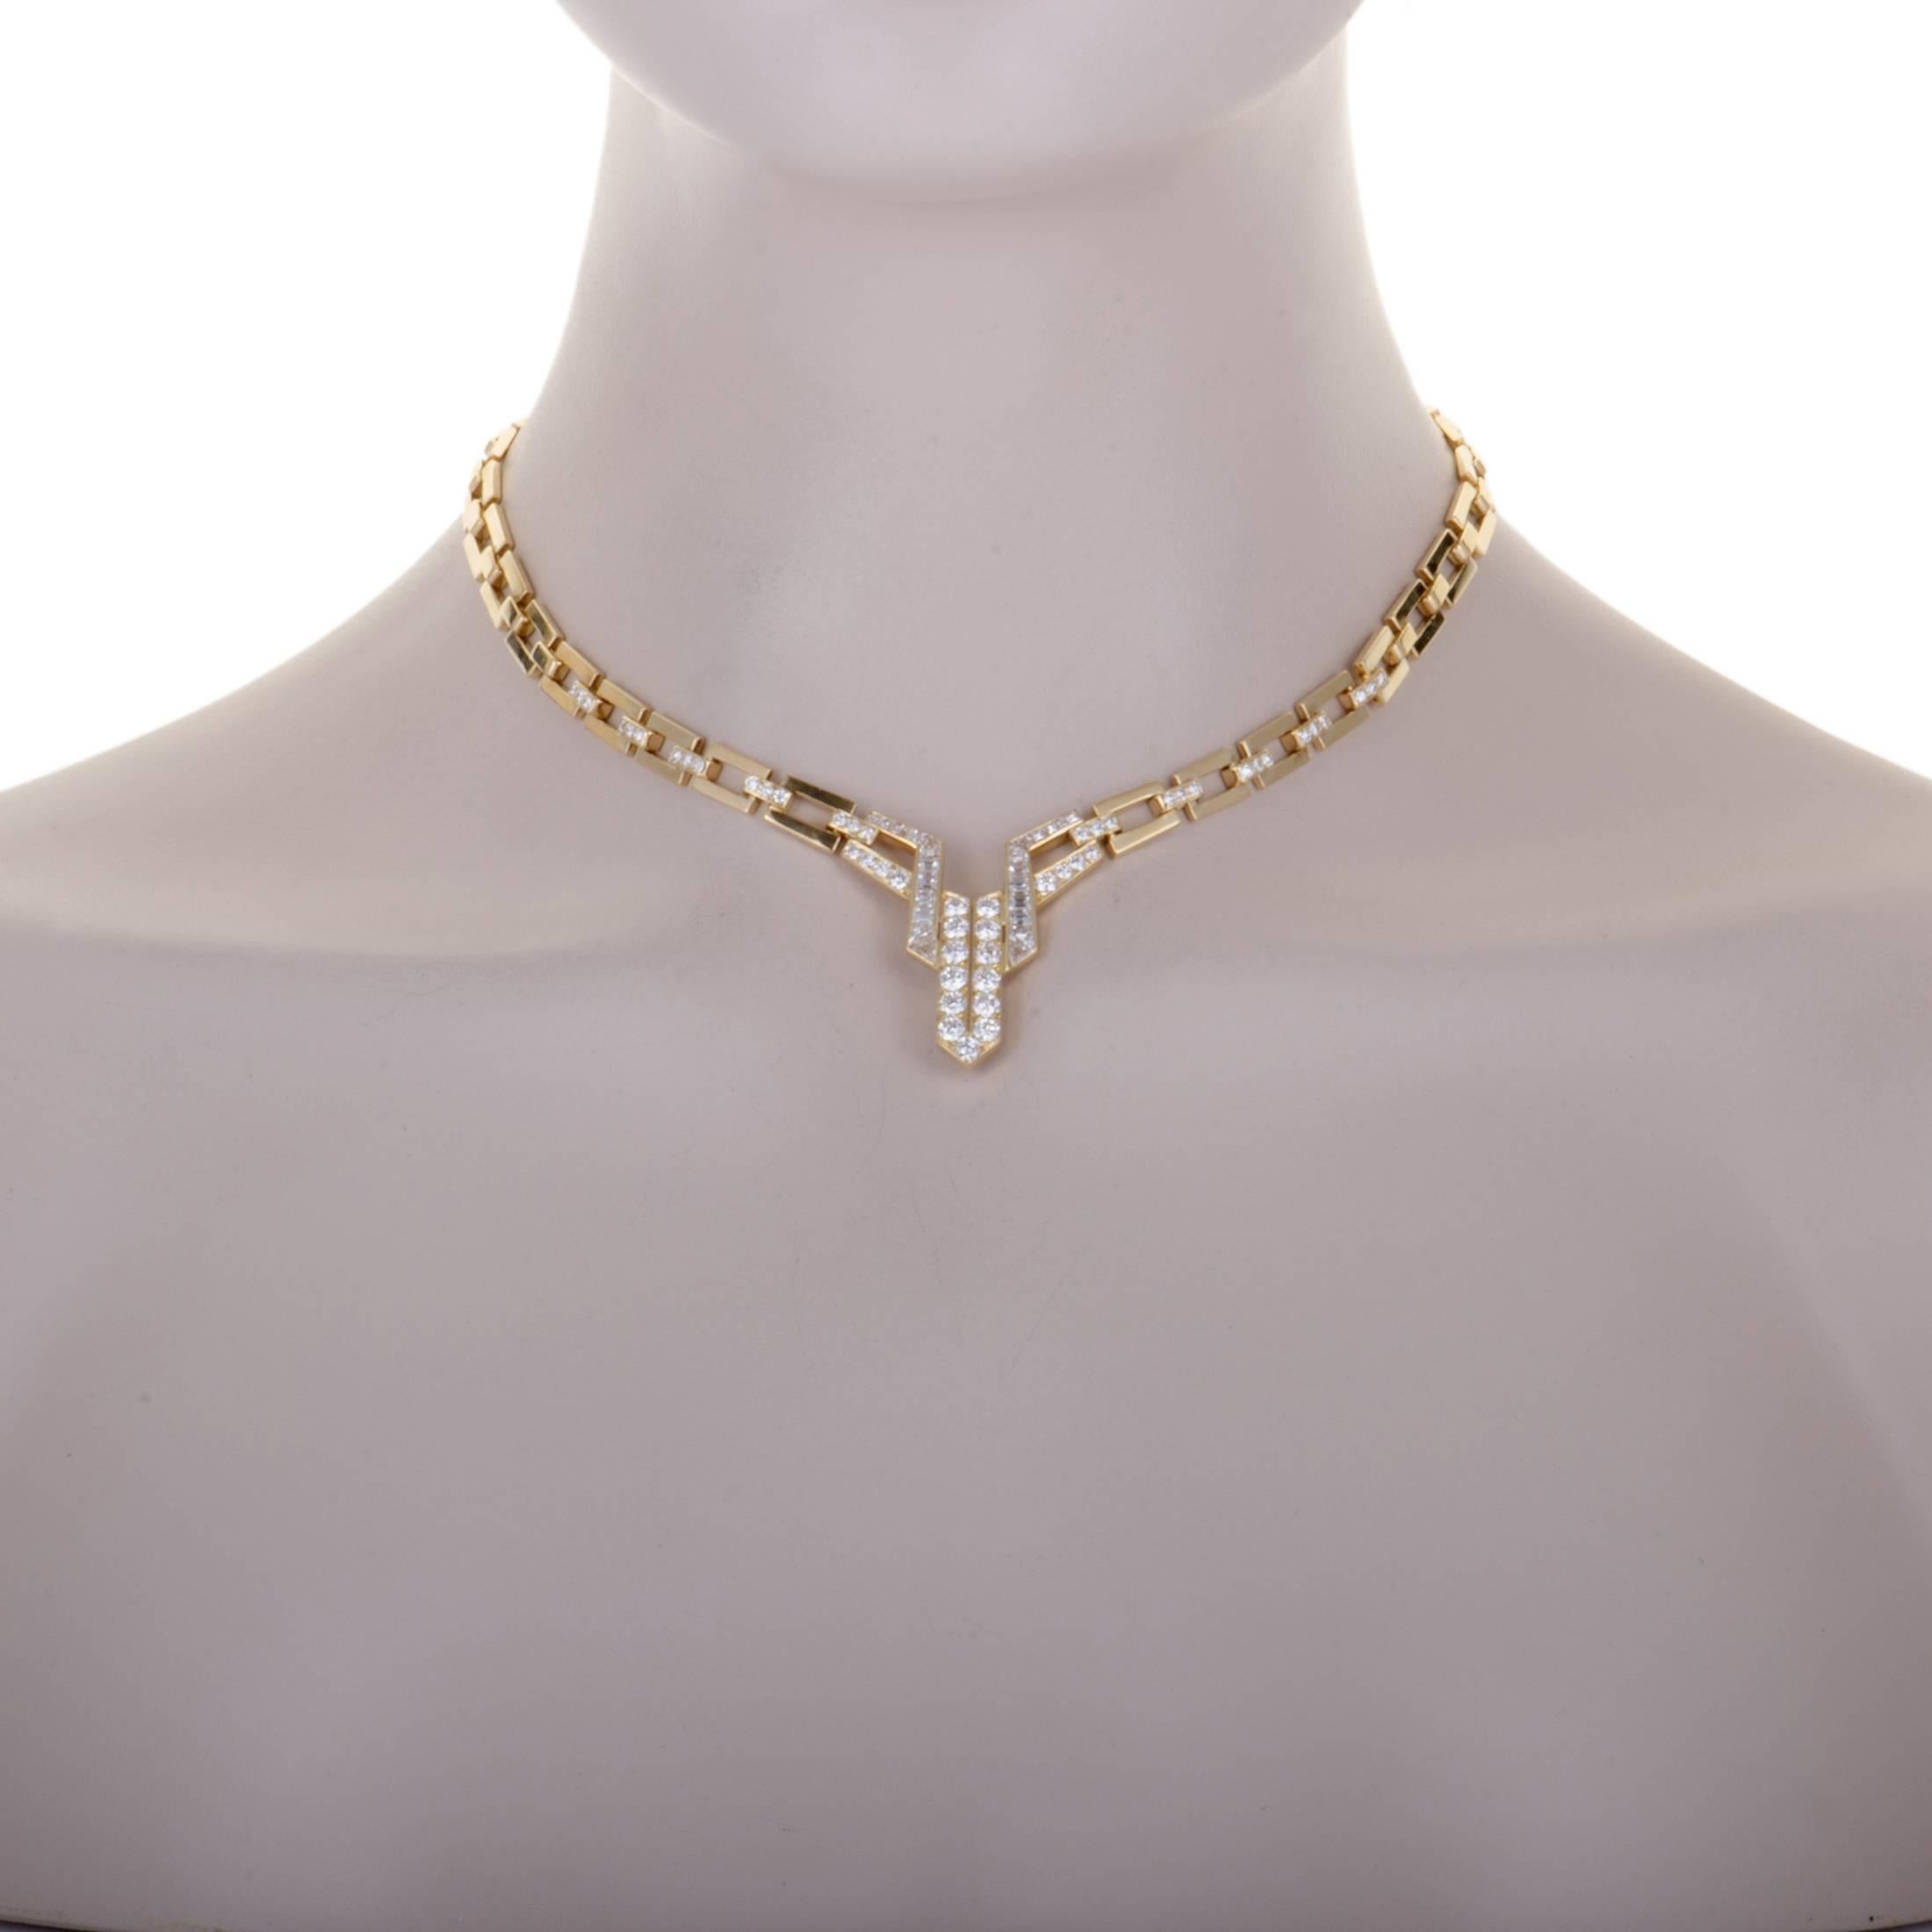 Designed in a compellingly elegant manner, this sublime necklace offers a look of utmost refinement and prestige. The necklace is made of classy 18K yellow gold and set with resplendent diamond stones that weigh approximately 4.95 carats in